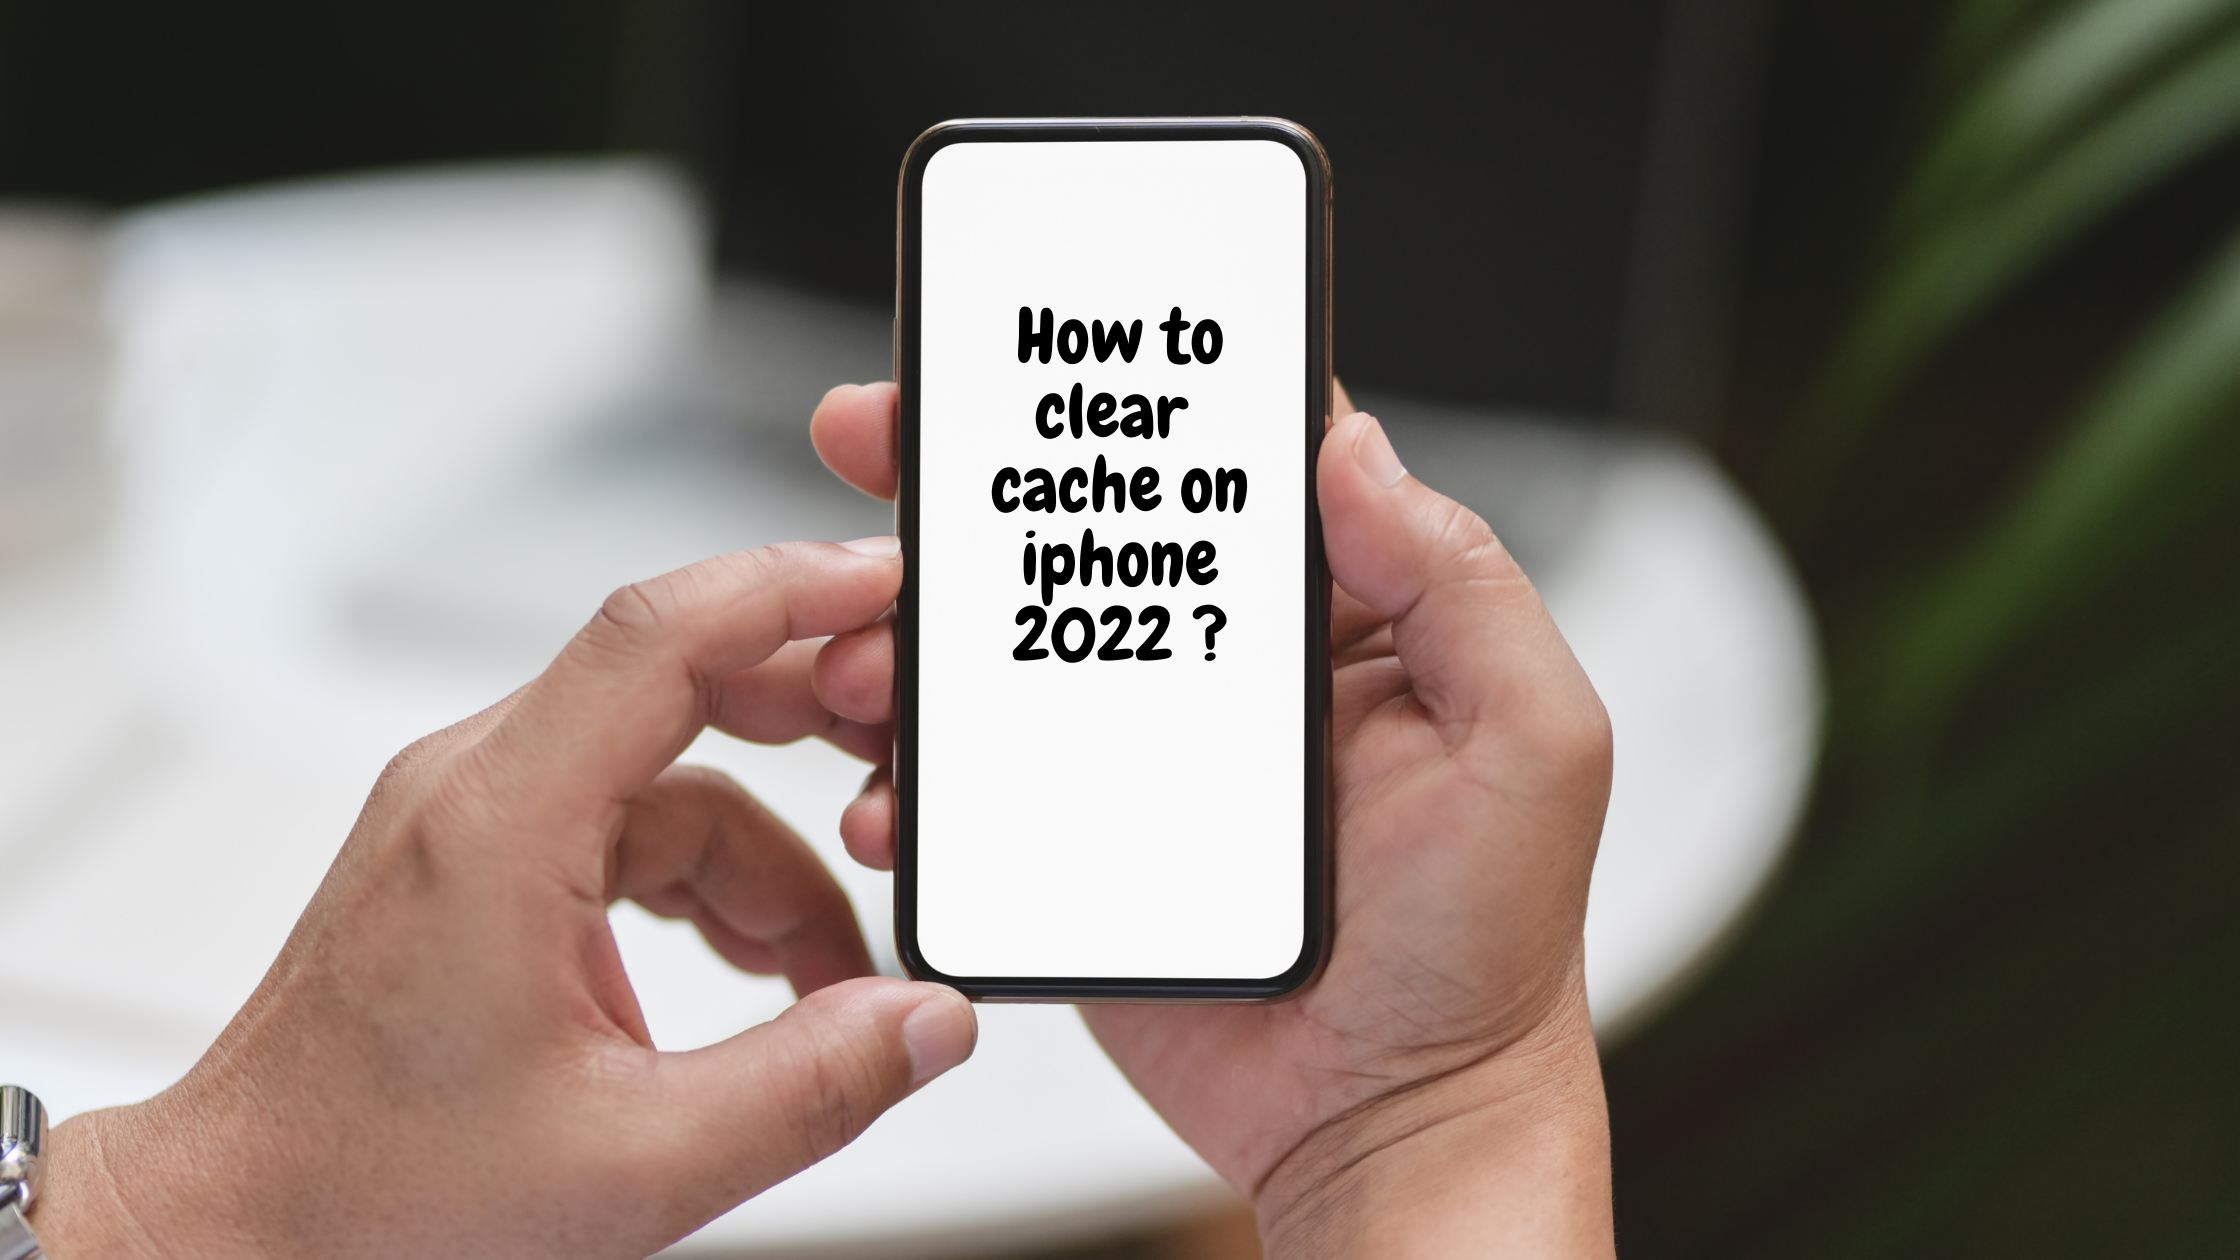 How to clear cache on iPhone 2022